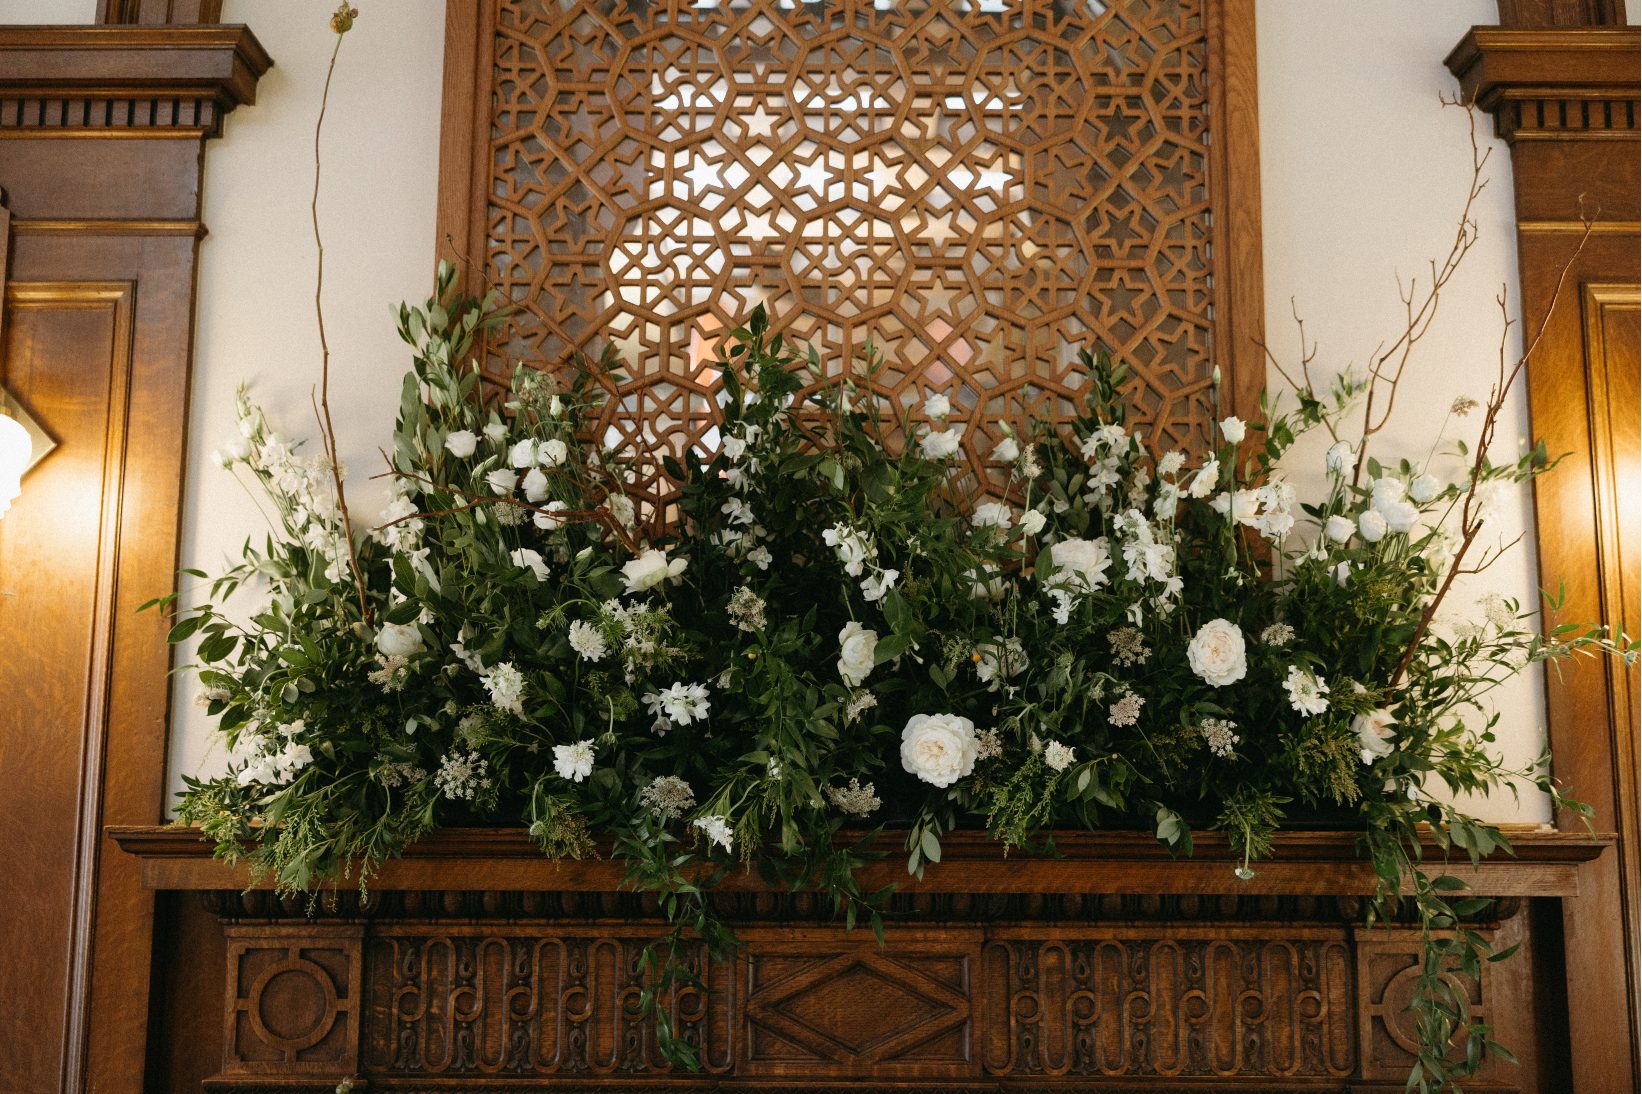 A close up of one of the beautiful natural styled arrangement at the reception, full of greenery and white flowers.